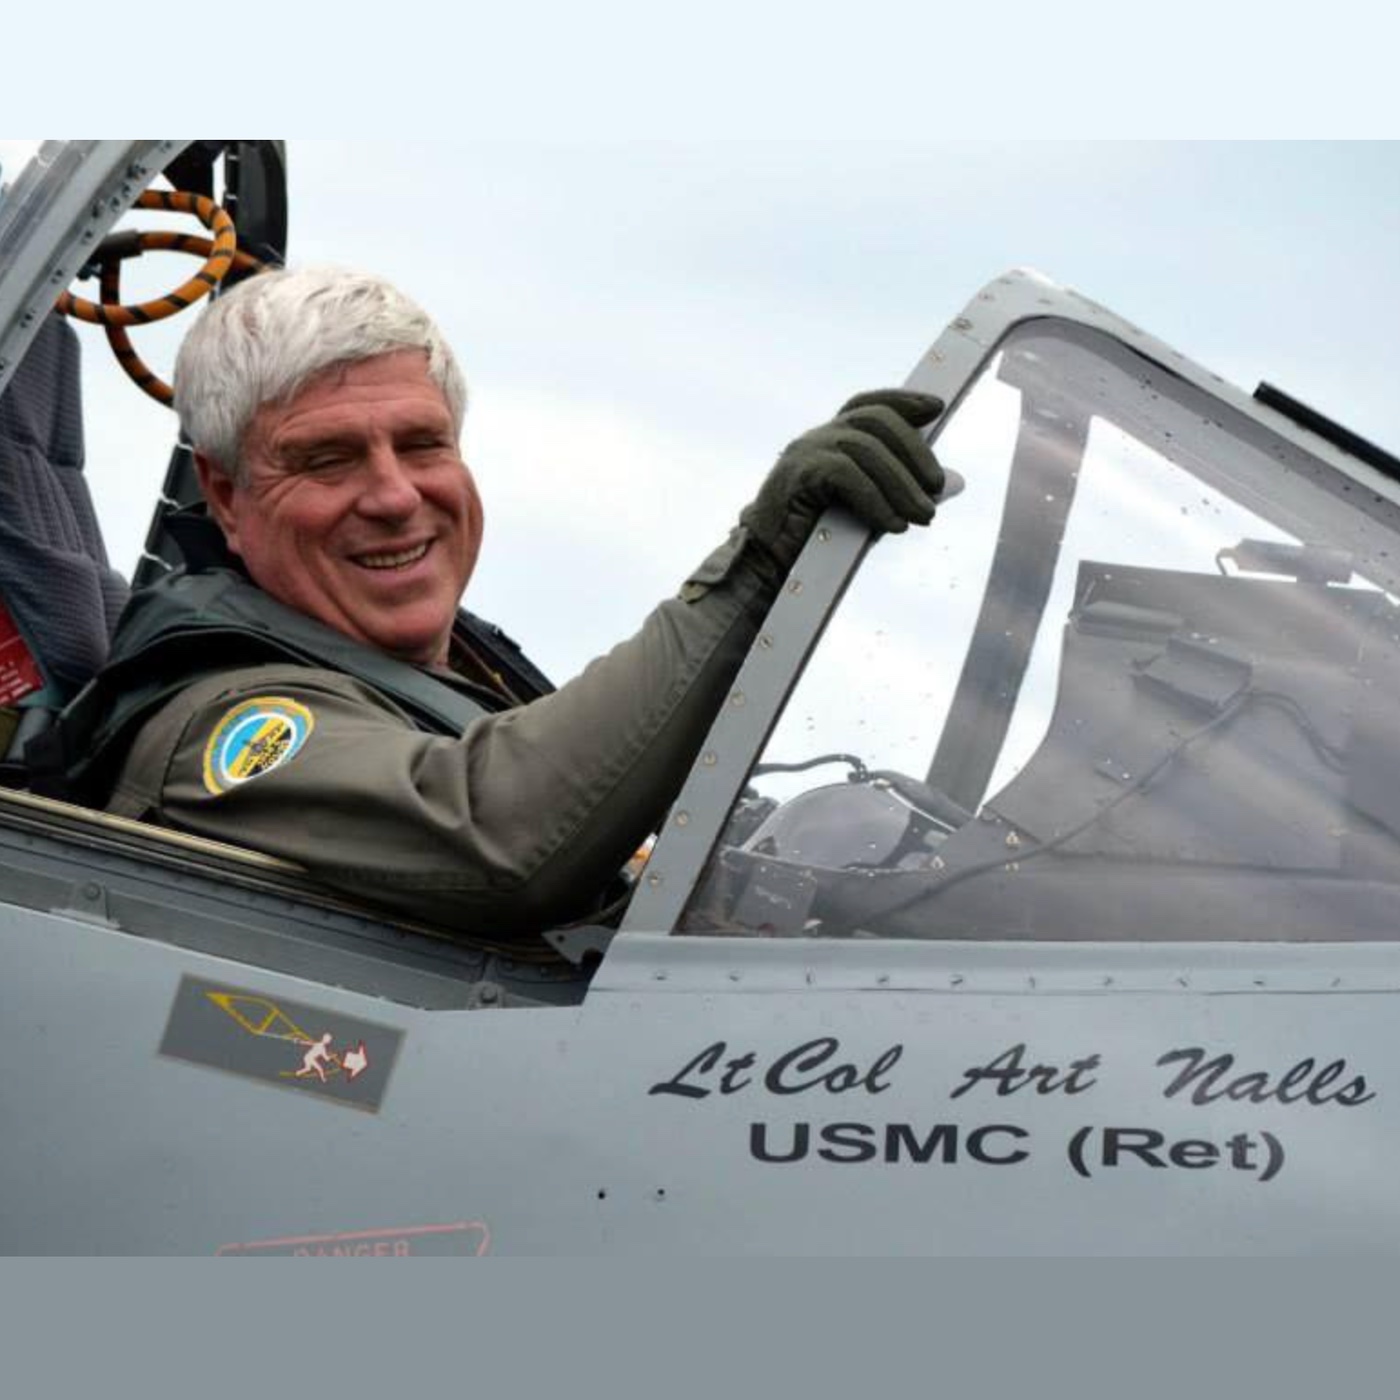 Kaos in his own Harrier